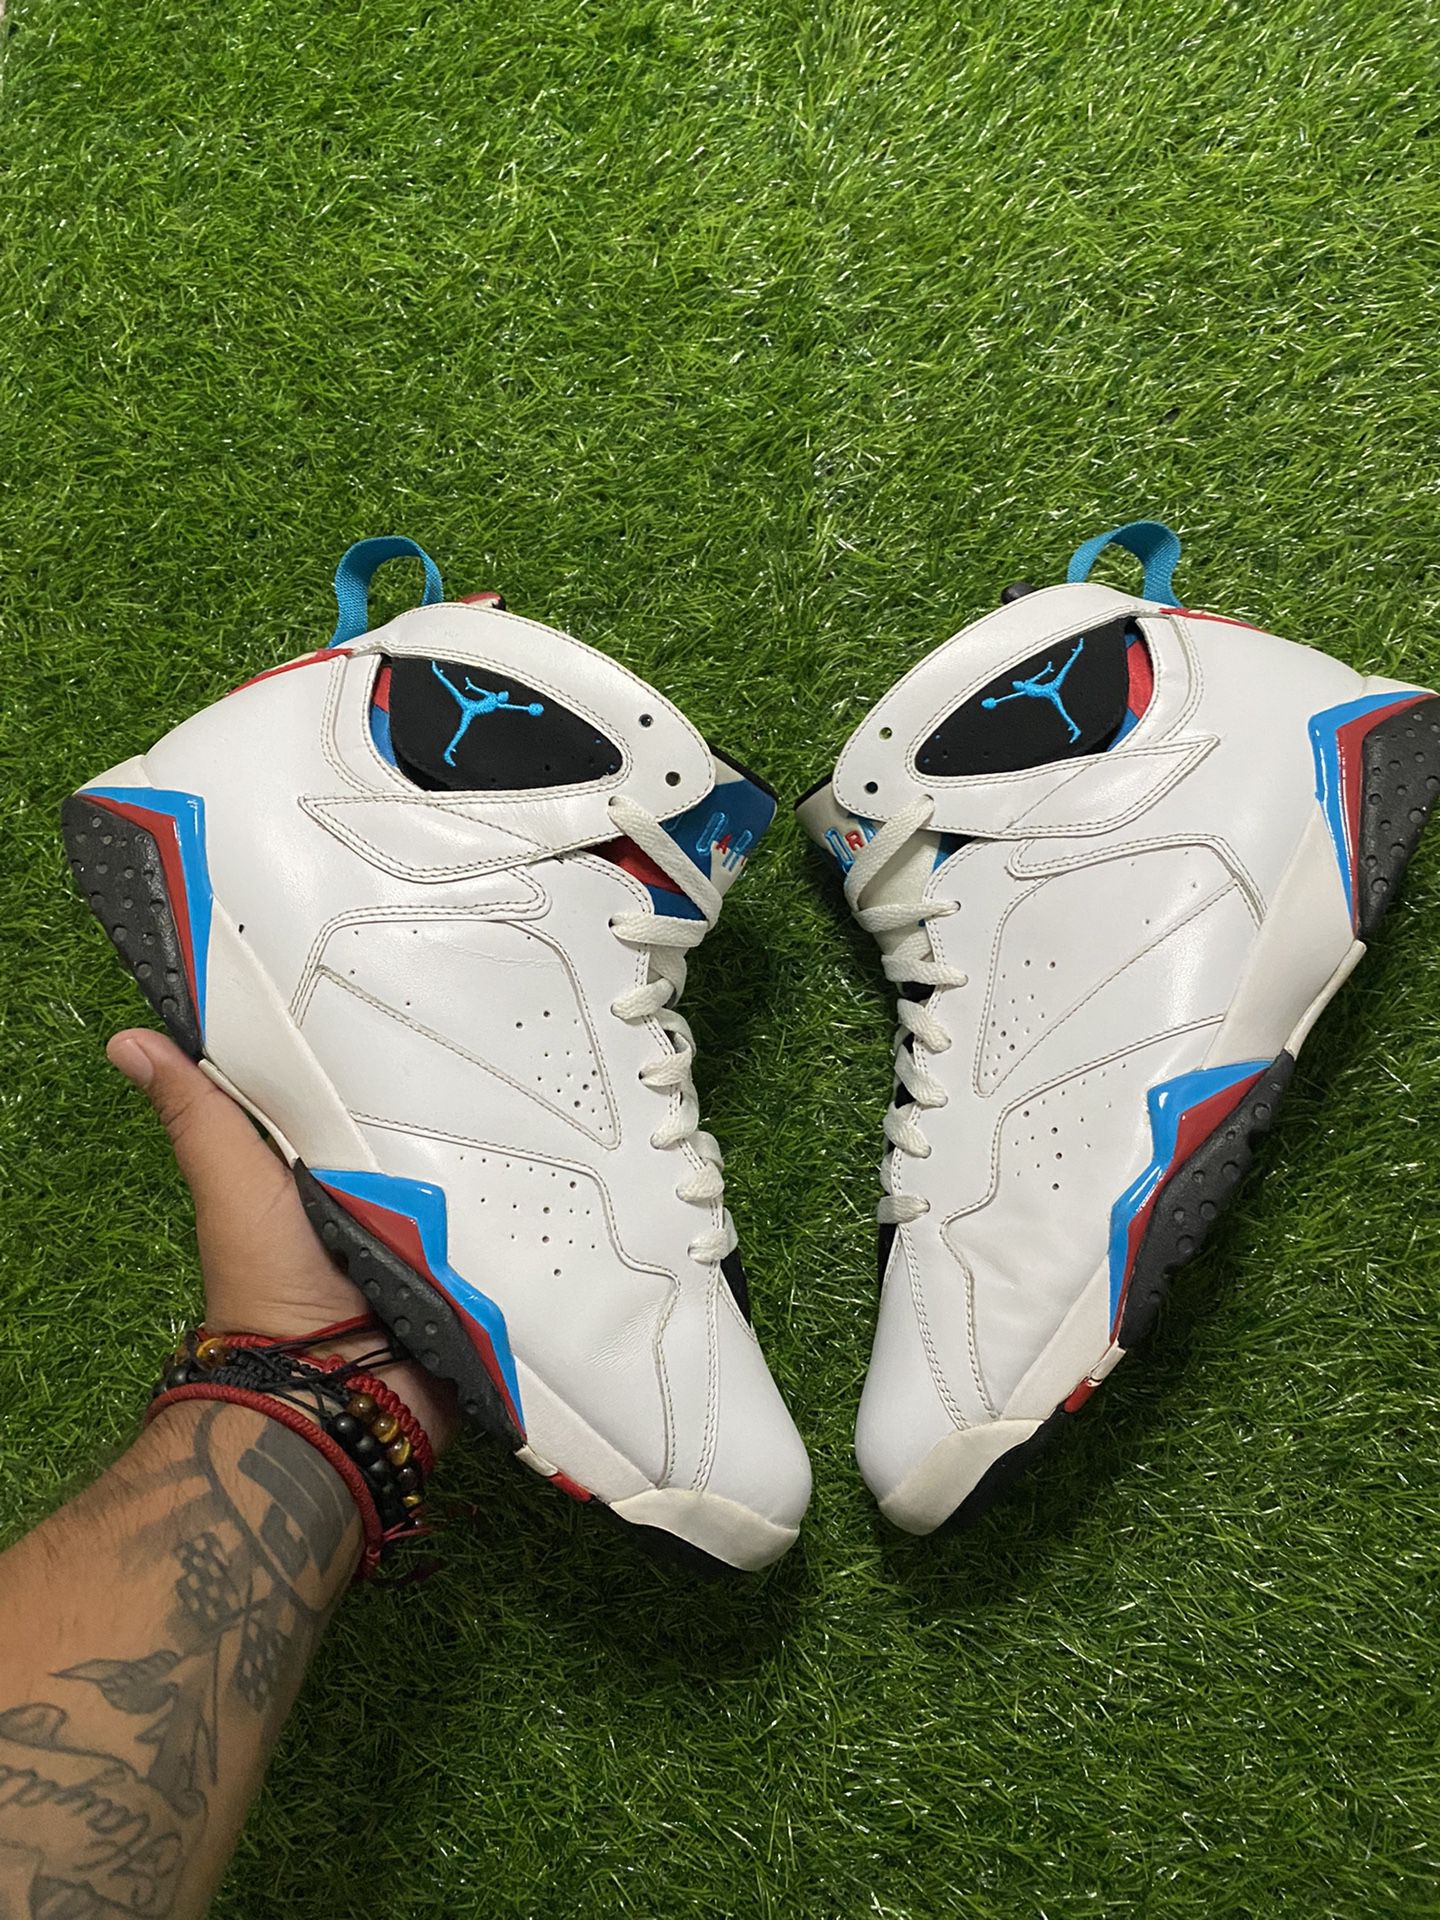 size 11 orion 7s